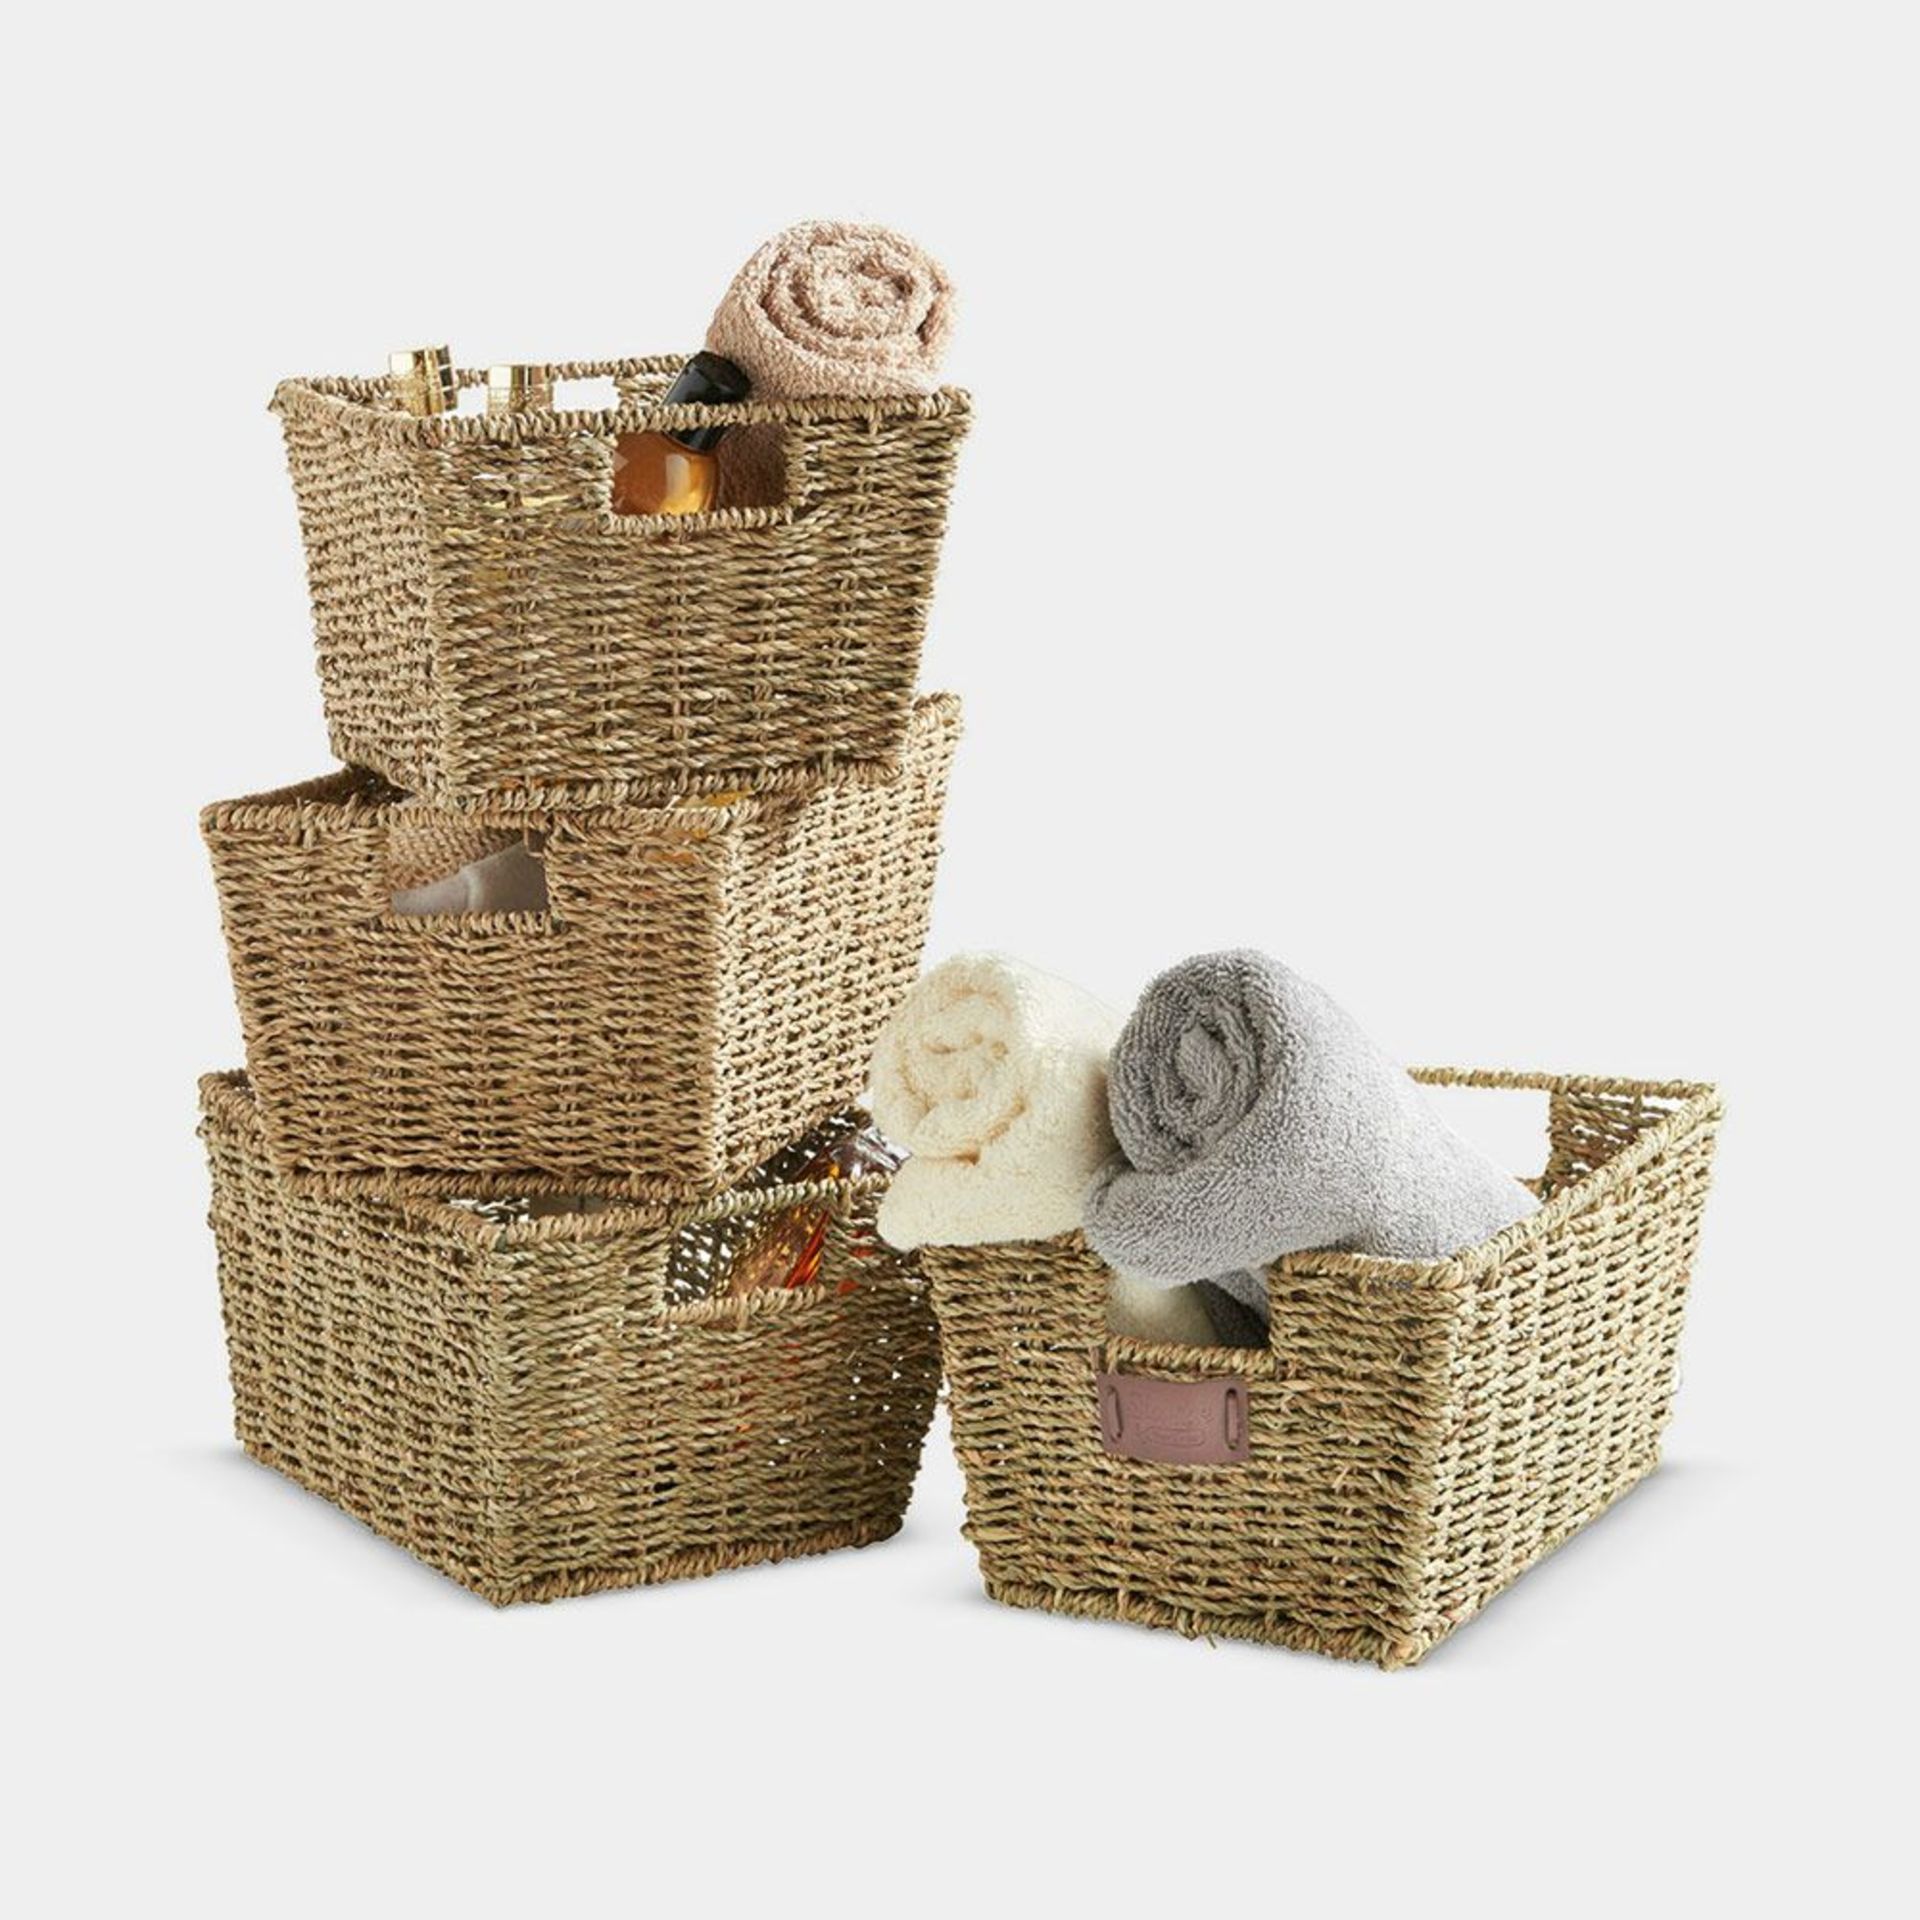 Set of 4 Seagrass Baskets. A charming addition to any room, these multi-purpose baskets offer a